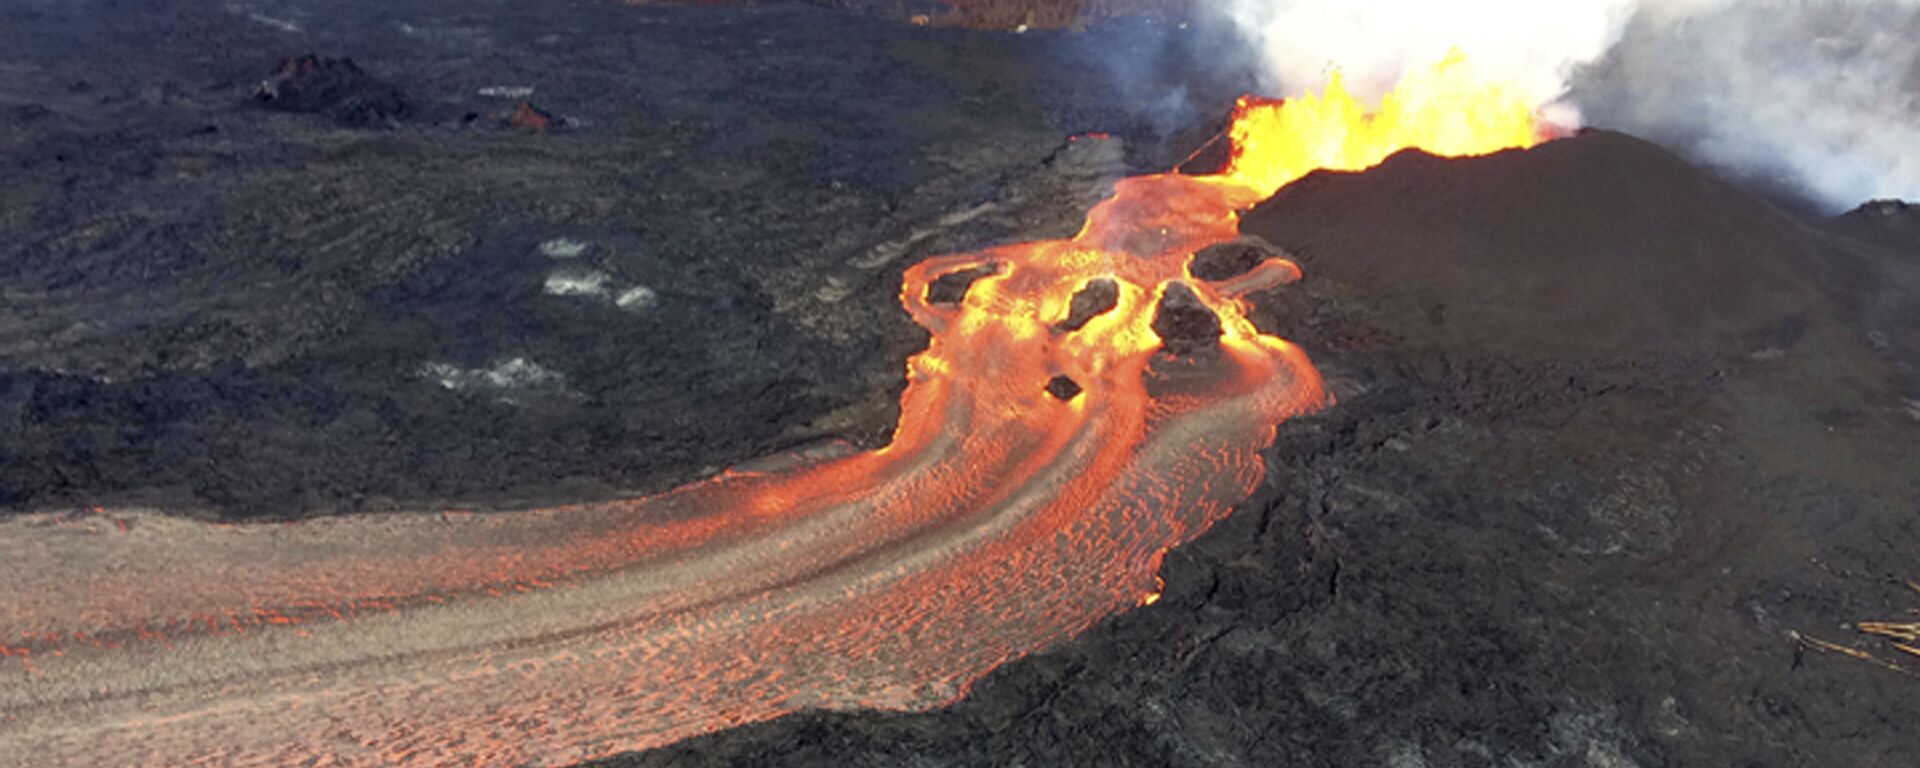 In this Sunday, June 10, 2018 photo from the U.S. Geological Survey, fissure 8 below Kilauea Volcano continues to erupt vigorously with lava streaming through a channel that reaches the ocean at Kapoho Bay on the island of Hawaii . The width of the active part of the lava channel varies along its length, but ranges from about 100 to 300 meters (yards) wide. A clear view of the cinder-and-spatter cone that's building around the vent from ongoing lava fountains can be seen here. - Sputnik International, 1920, 30.05.2022